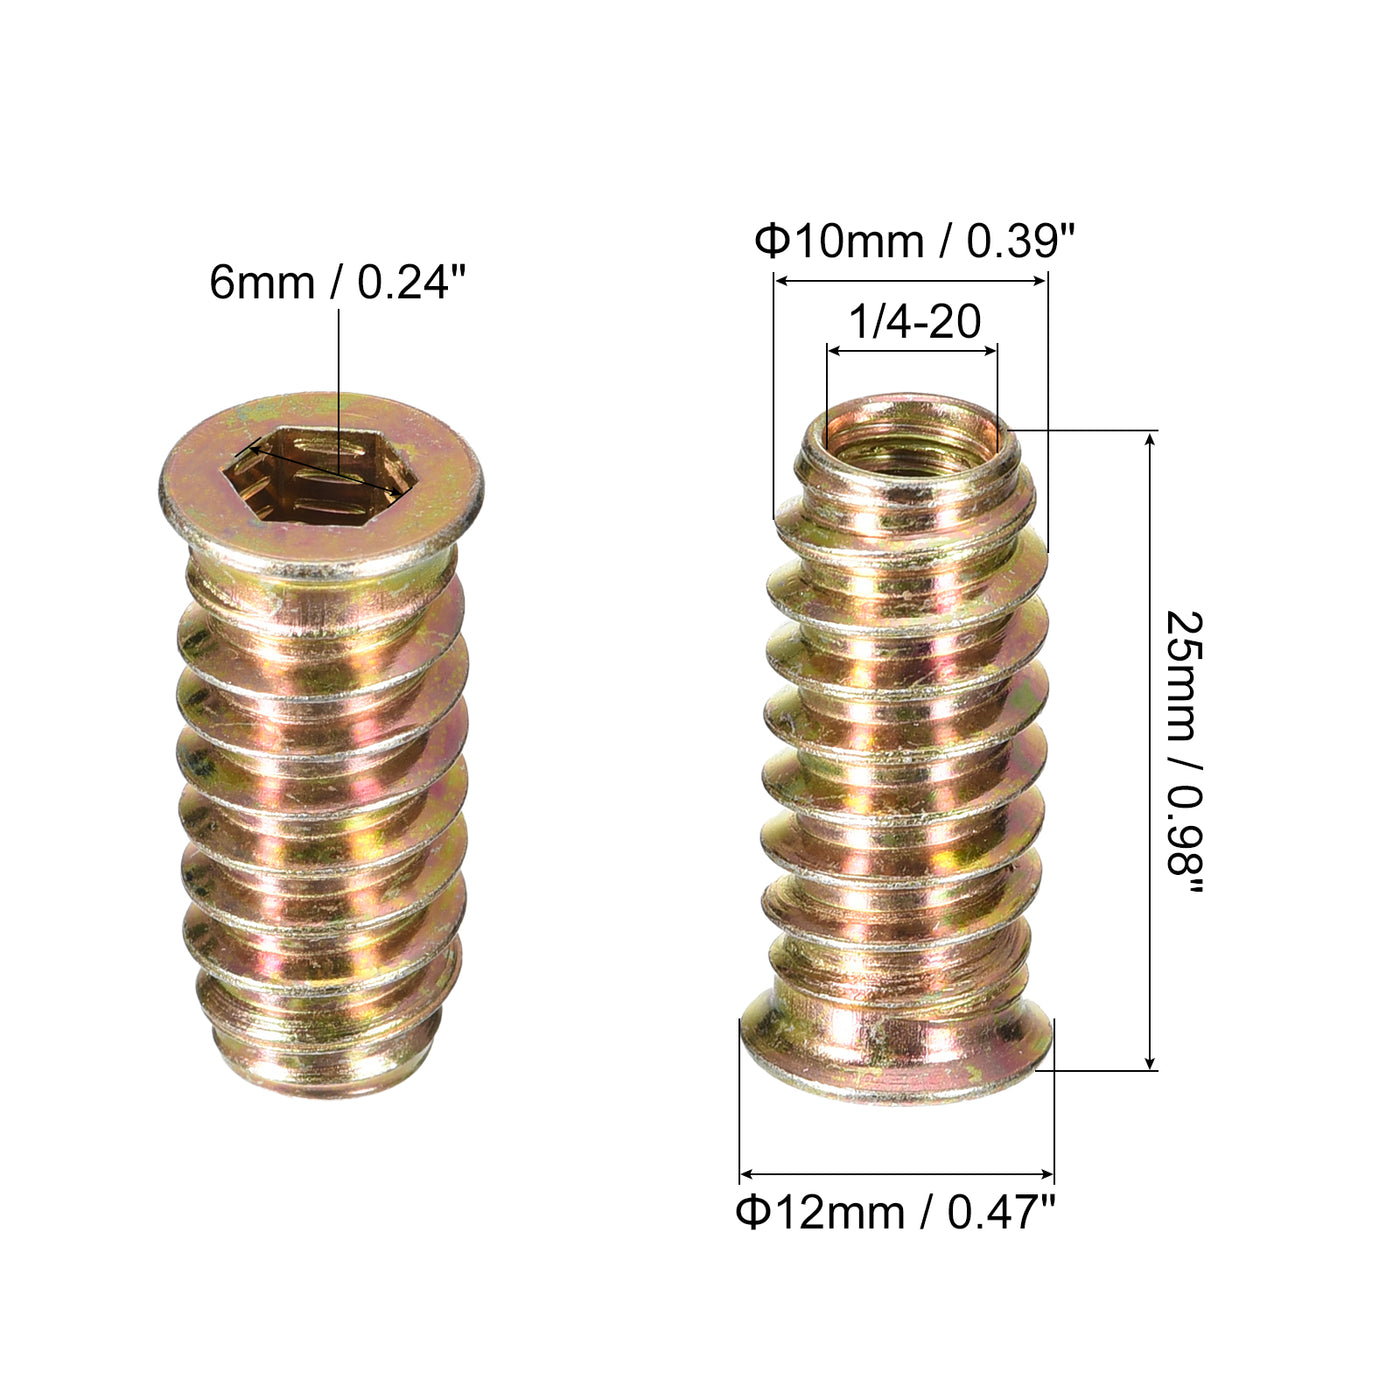 uxcell Uxcell Threaded Inserts Nuts, Threaded Inserts for Wood Furniture, Wood Insert Nuts with Hex Wrench